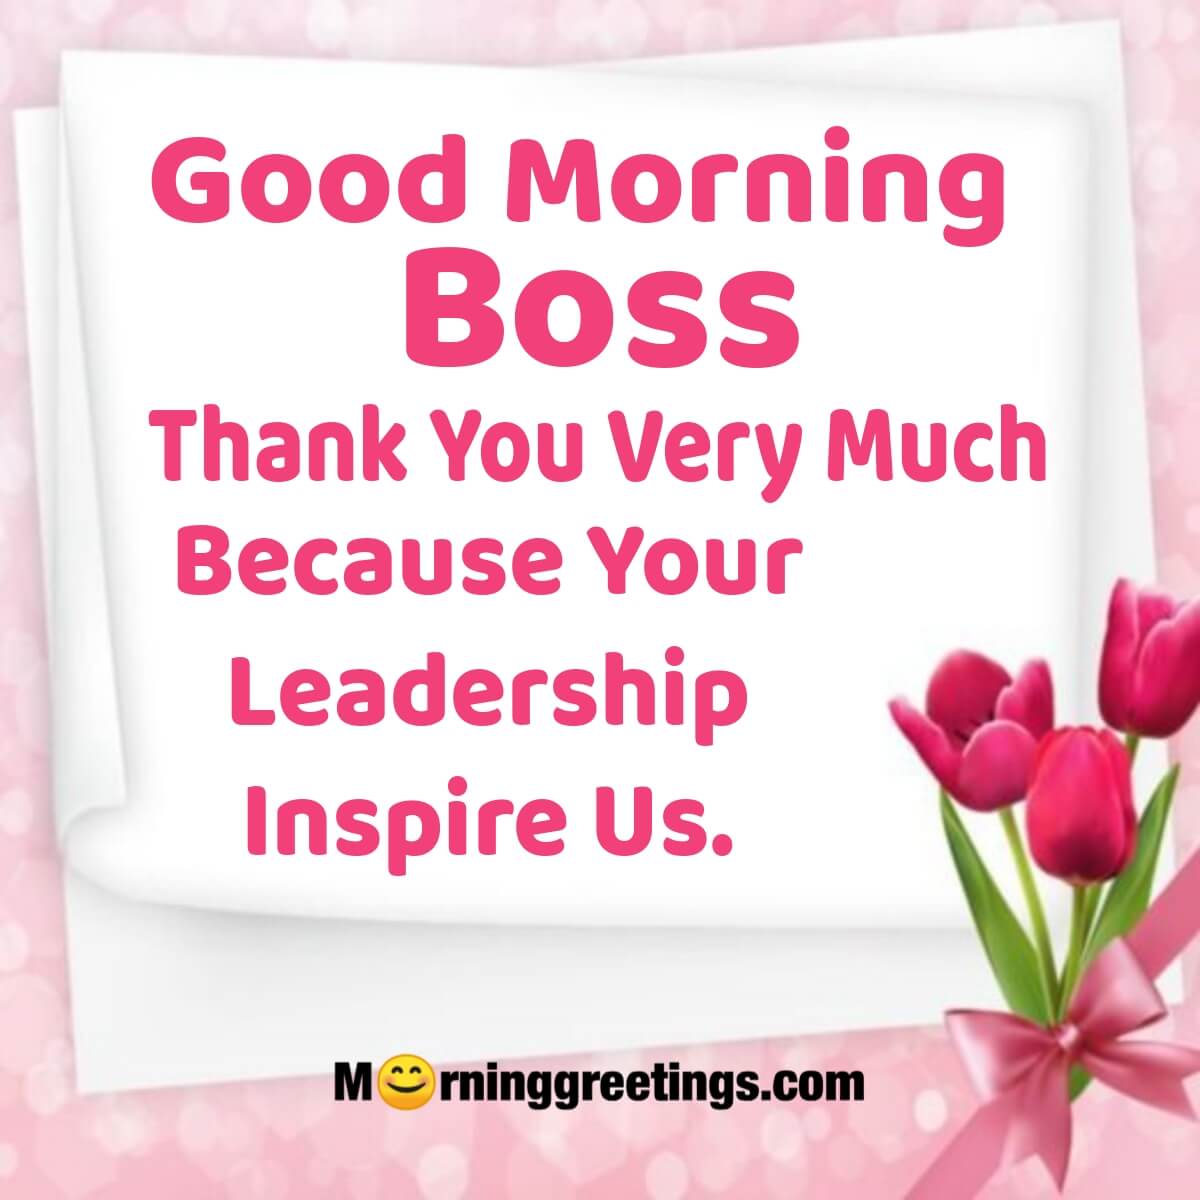 Good Morning Boss Thank You Very Much